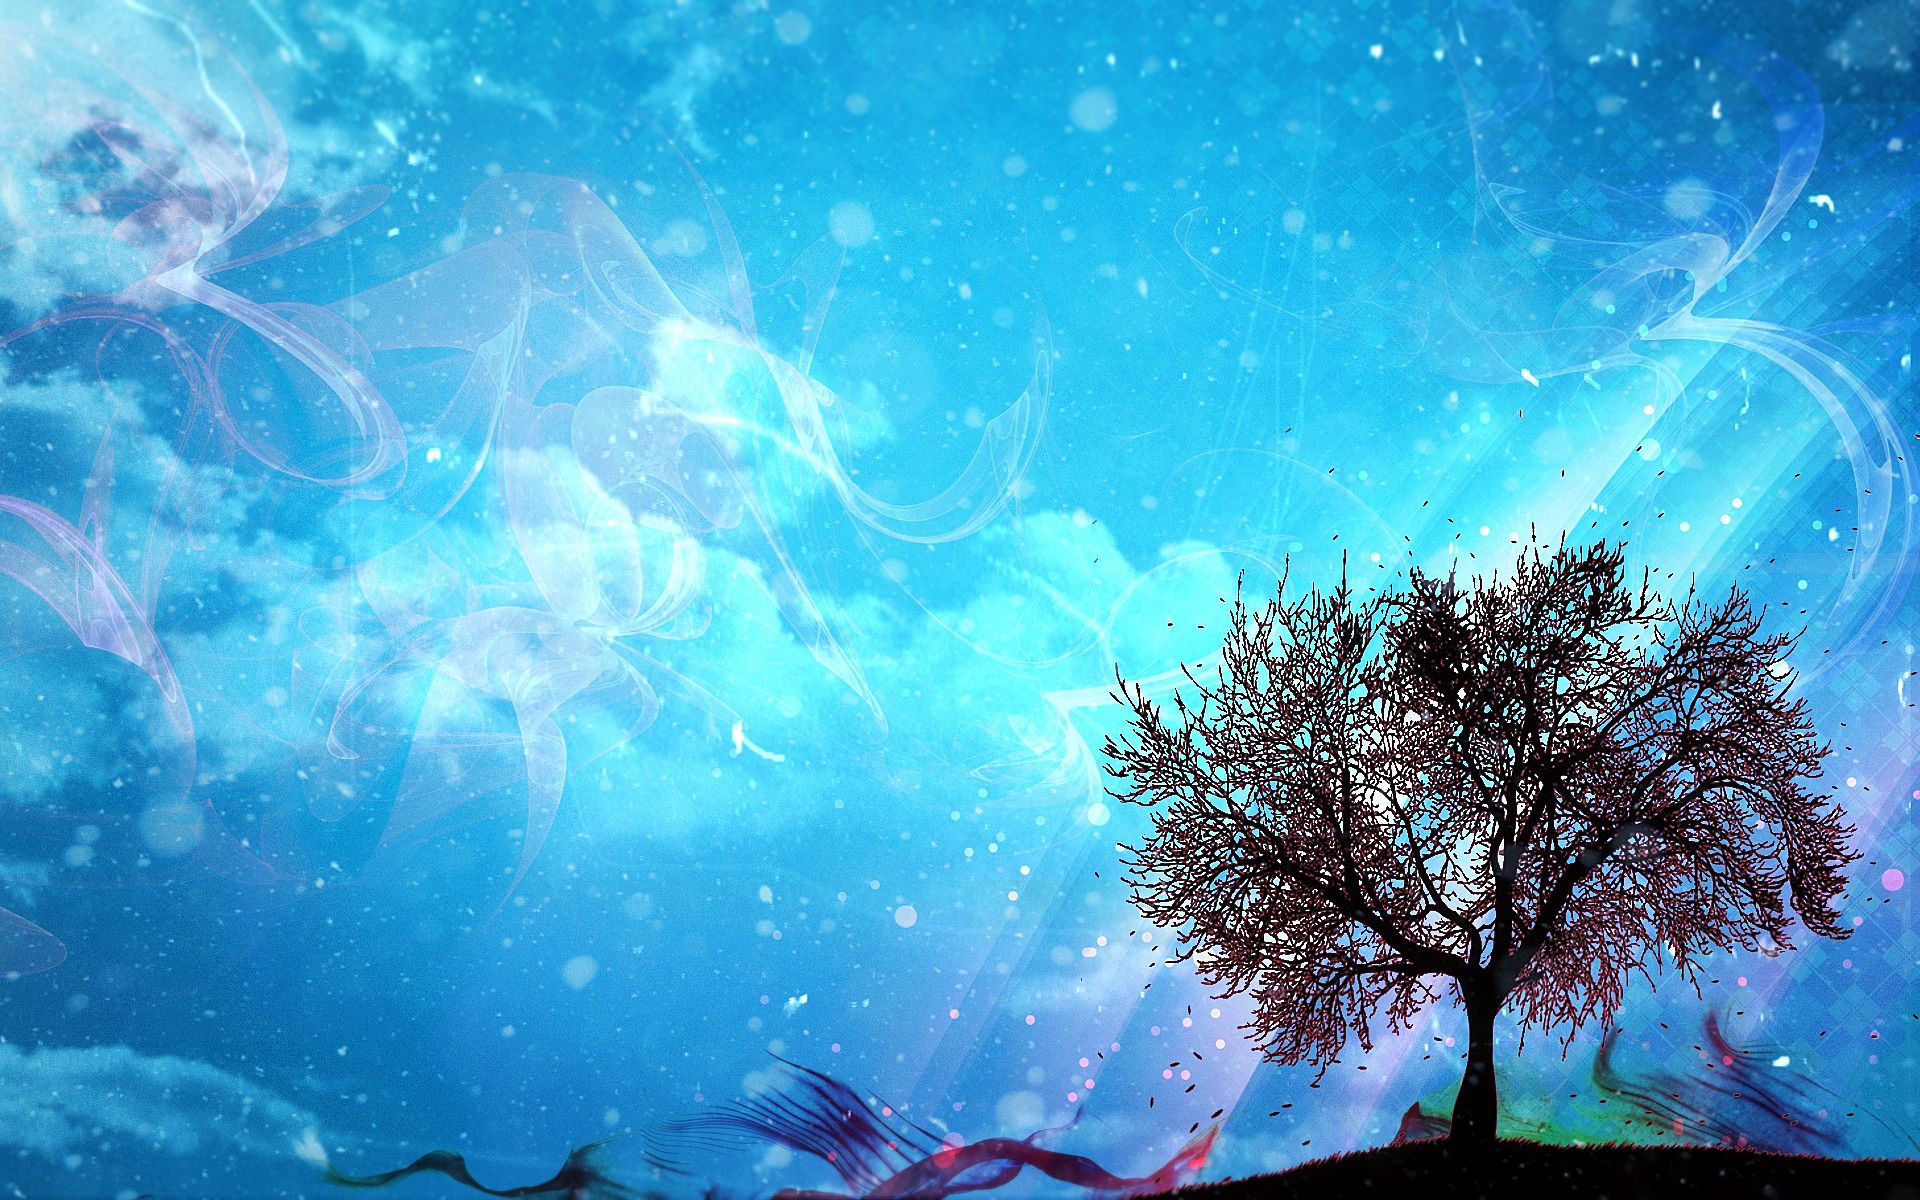 Wallpaper for mobile devices picture, tree, drawing, vector